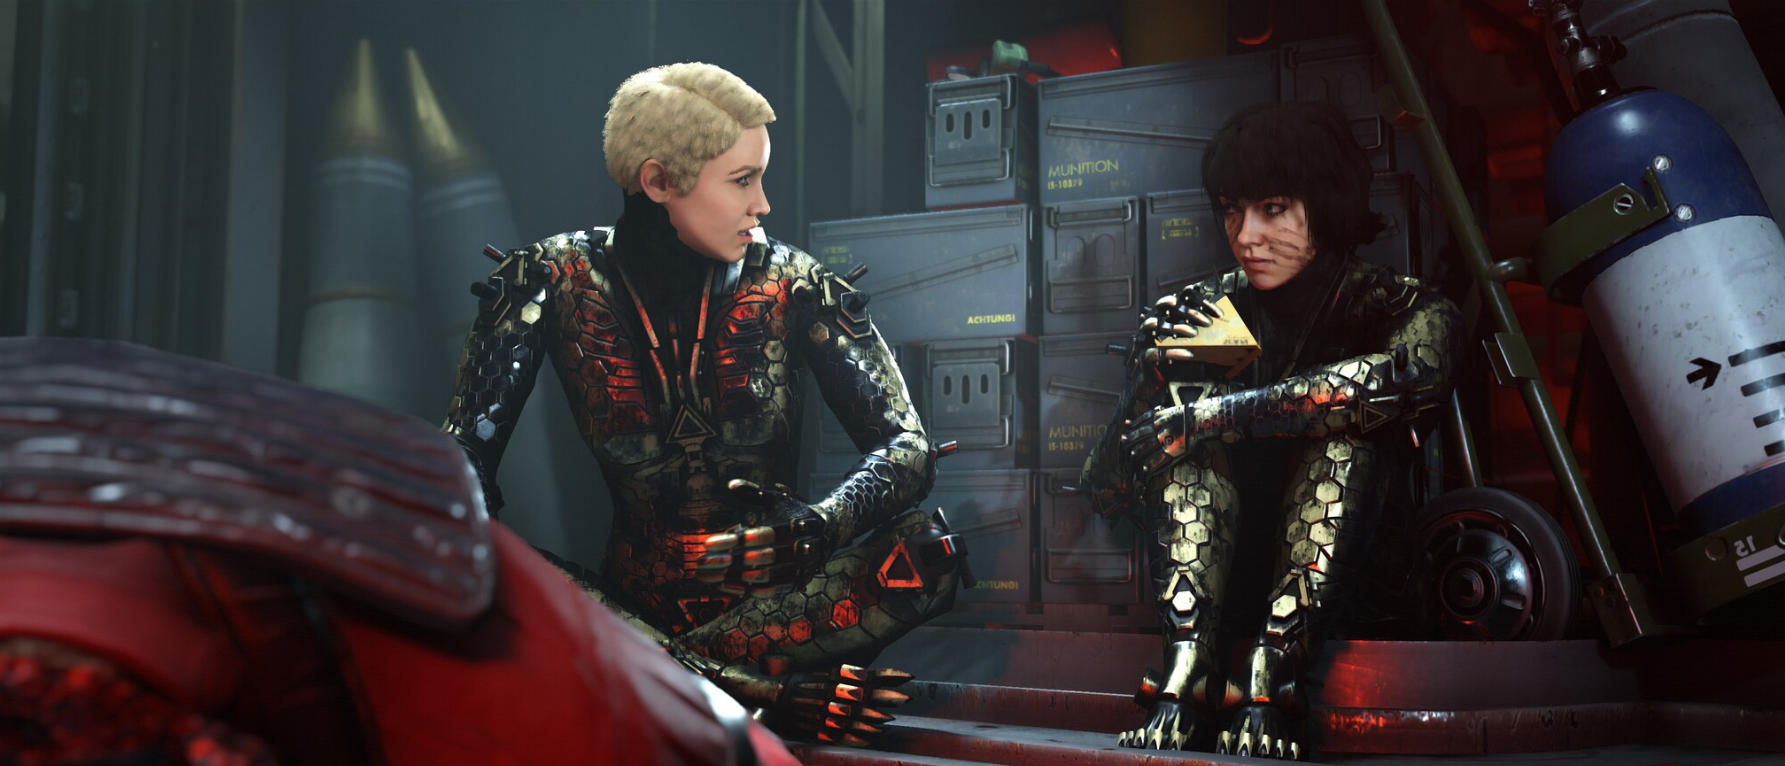 Image for Wolfenstein: Youngblood review - a spinoff that doesn’t quite live up to the previous games